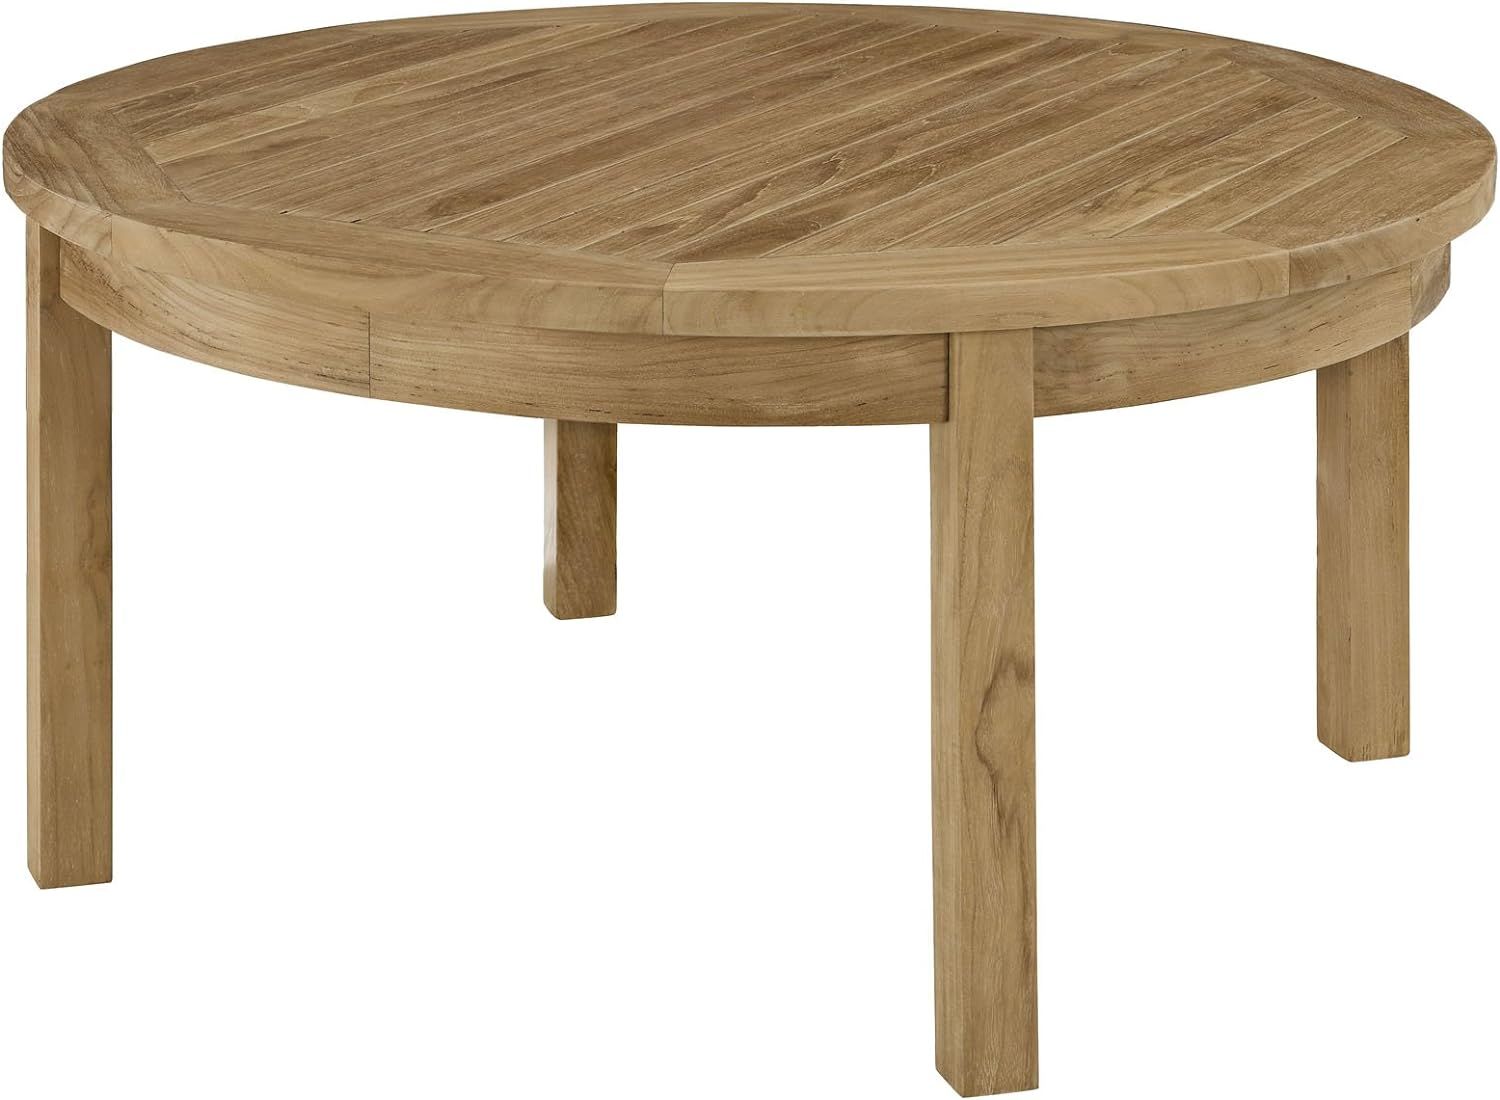 Modway Marina Premium Grade A Teak Wood Outdoor Patio Round Coffee Table in Natural | Amazon (US)